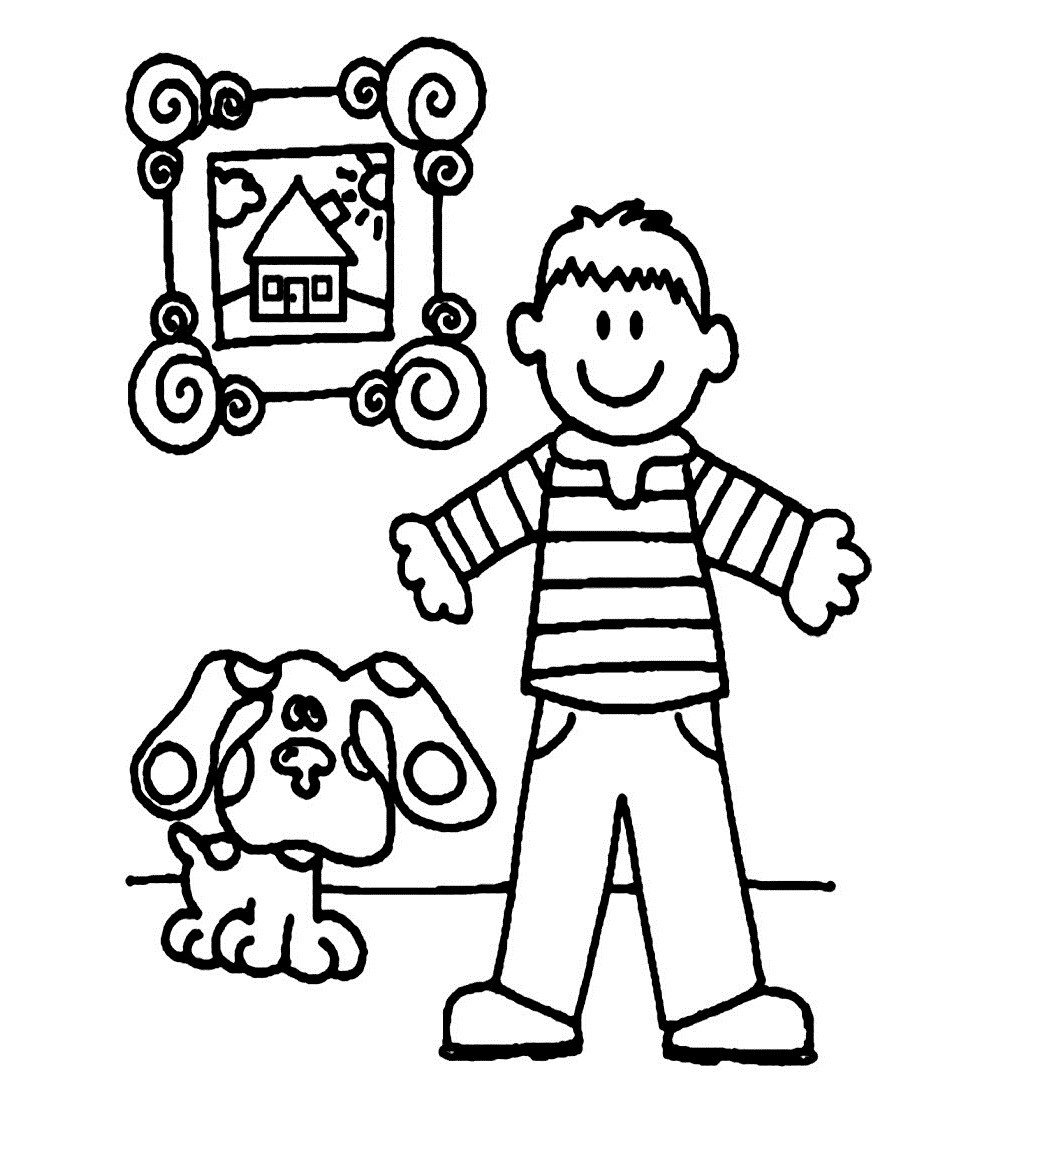 Free Print Coloring Pages For Boys
 Free Printable Boy Coloring Pages For Kids